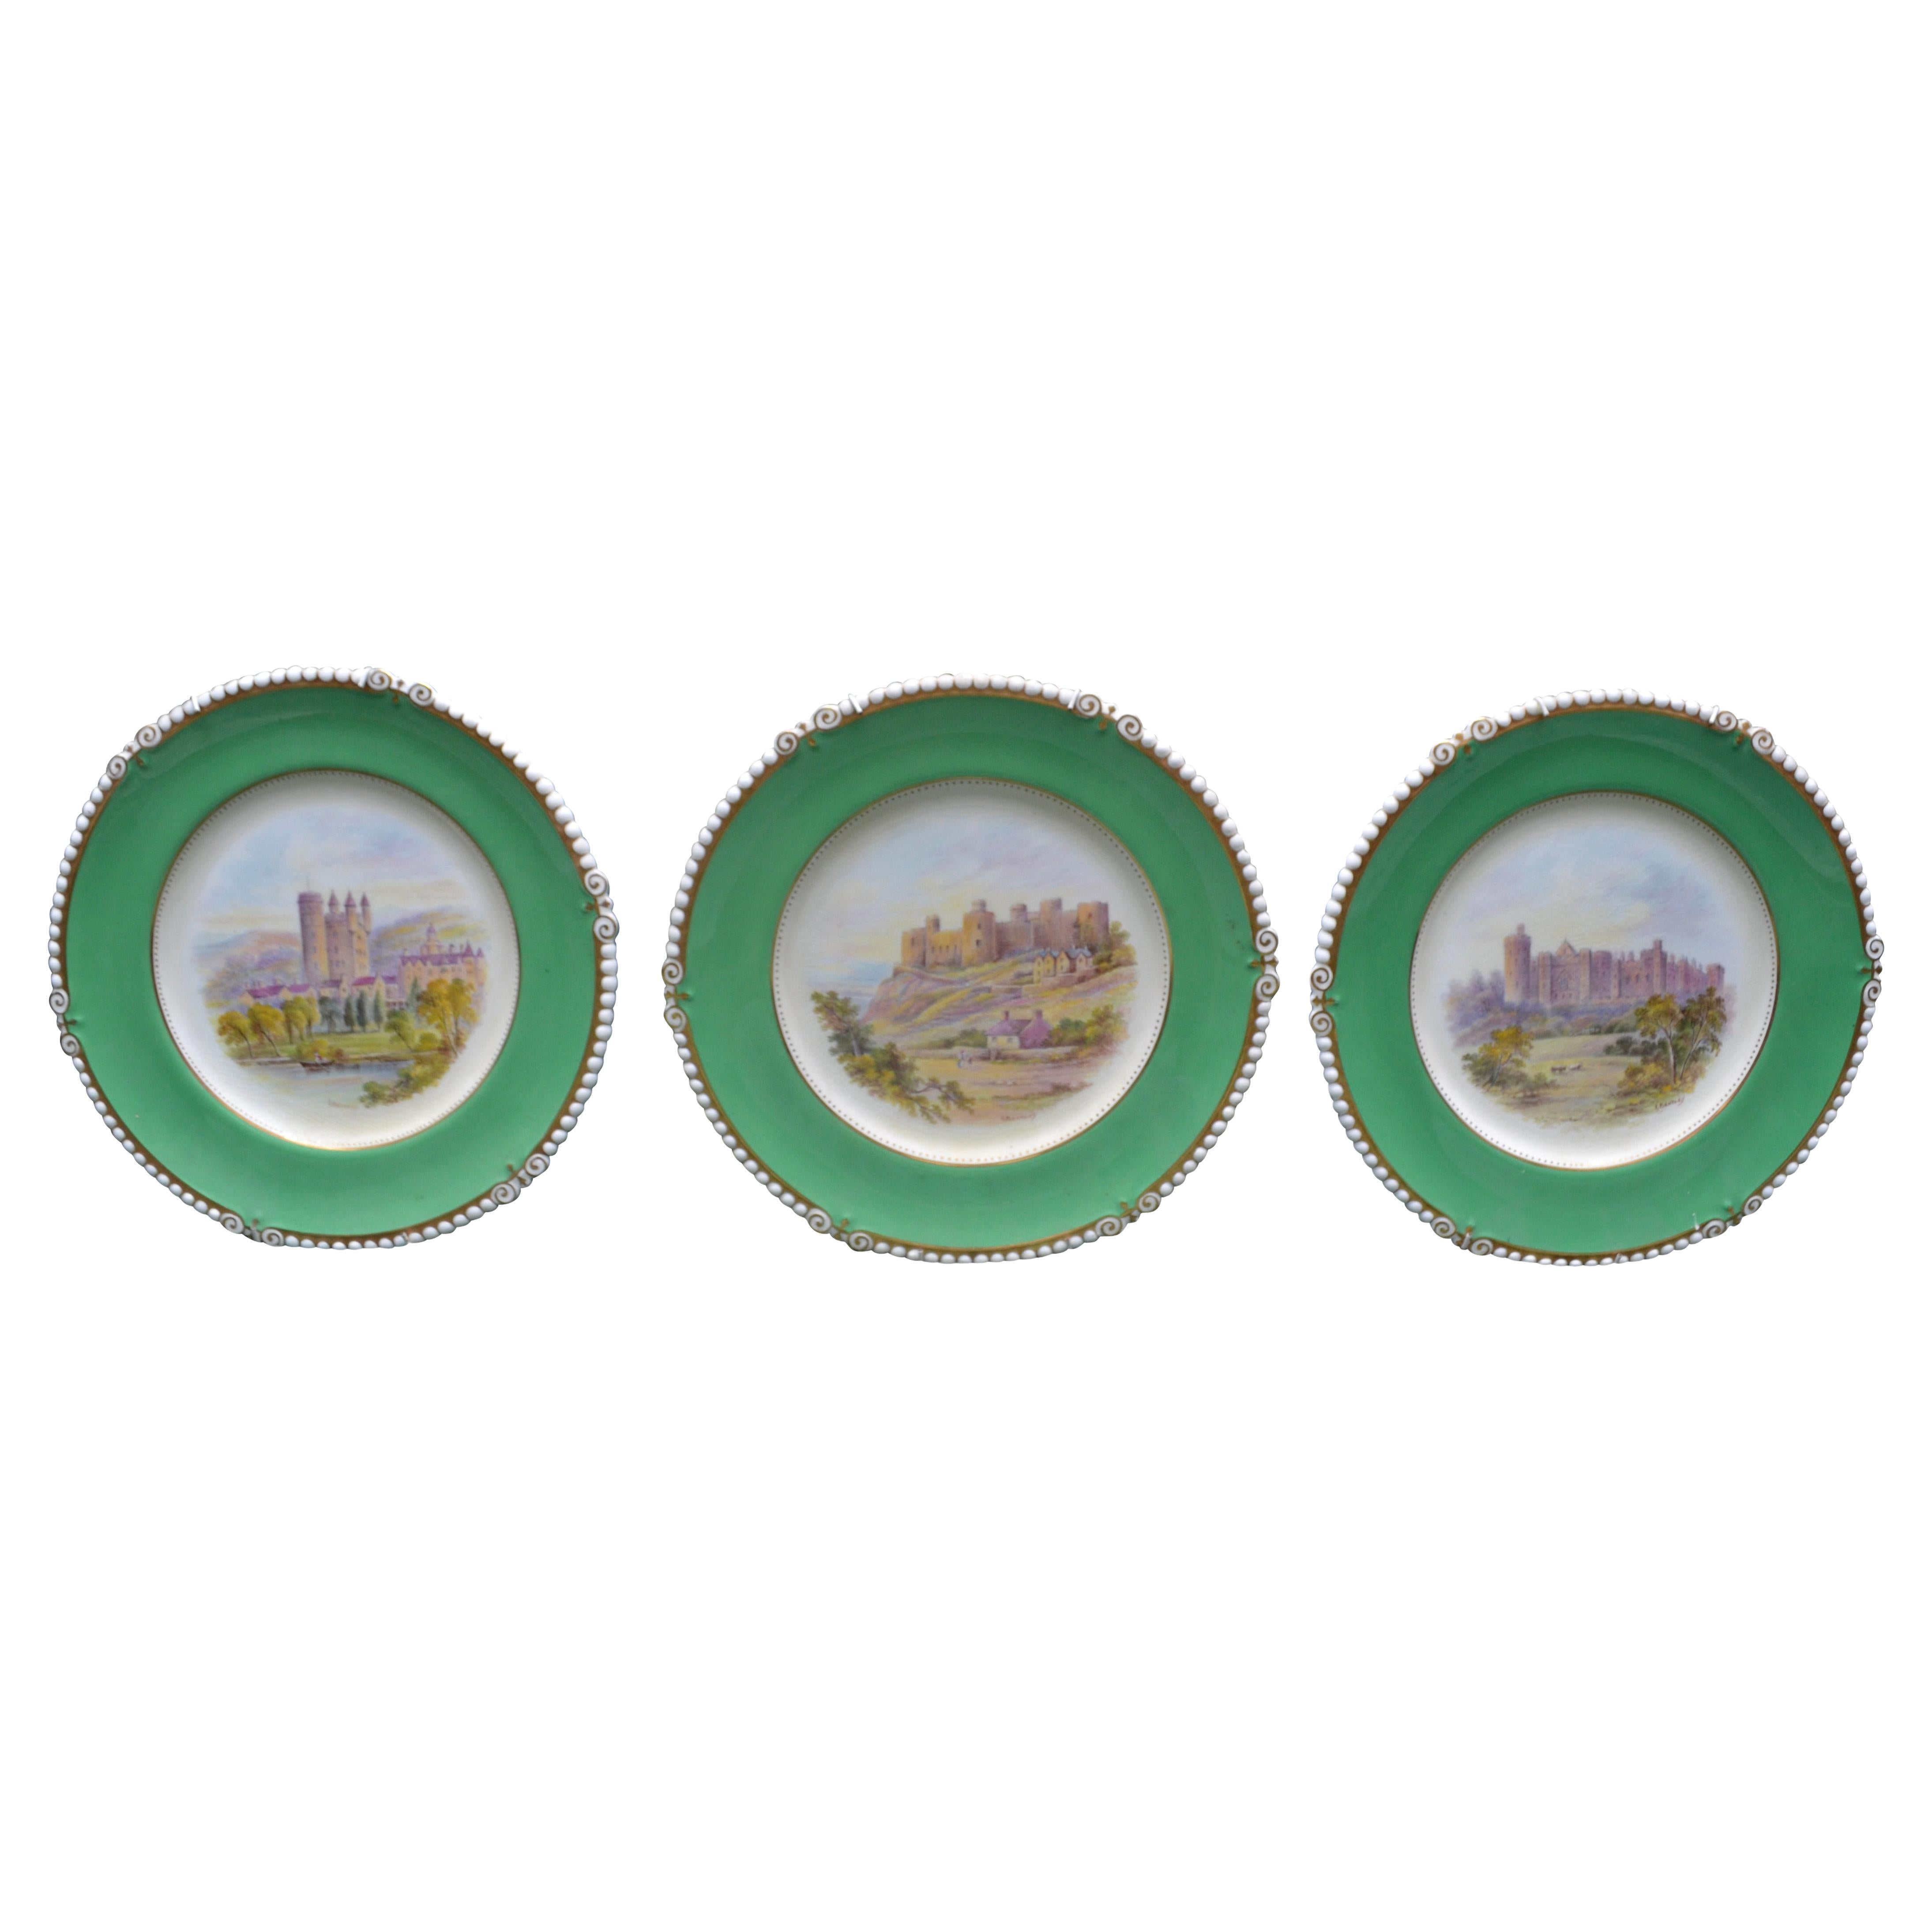  3 Aynsley Porcelain Plates with Green Borders and Paintings of British Castles For Sale